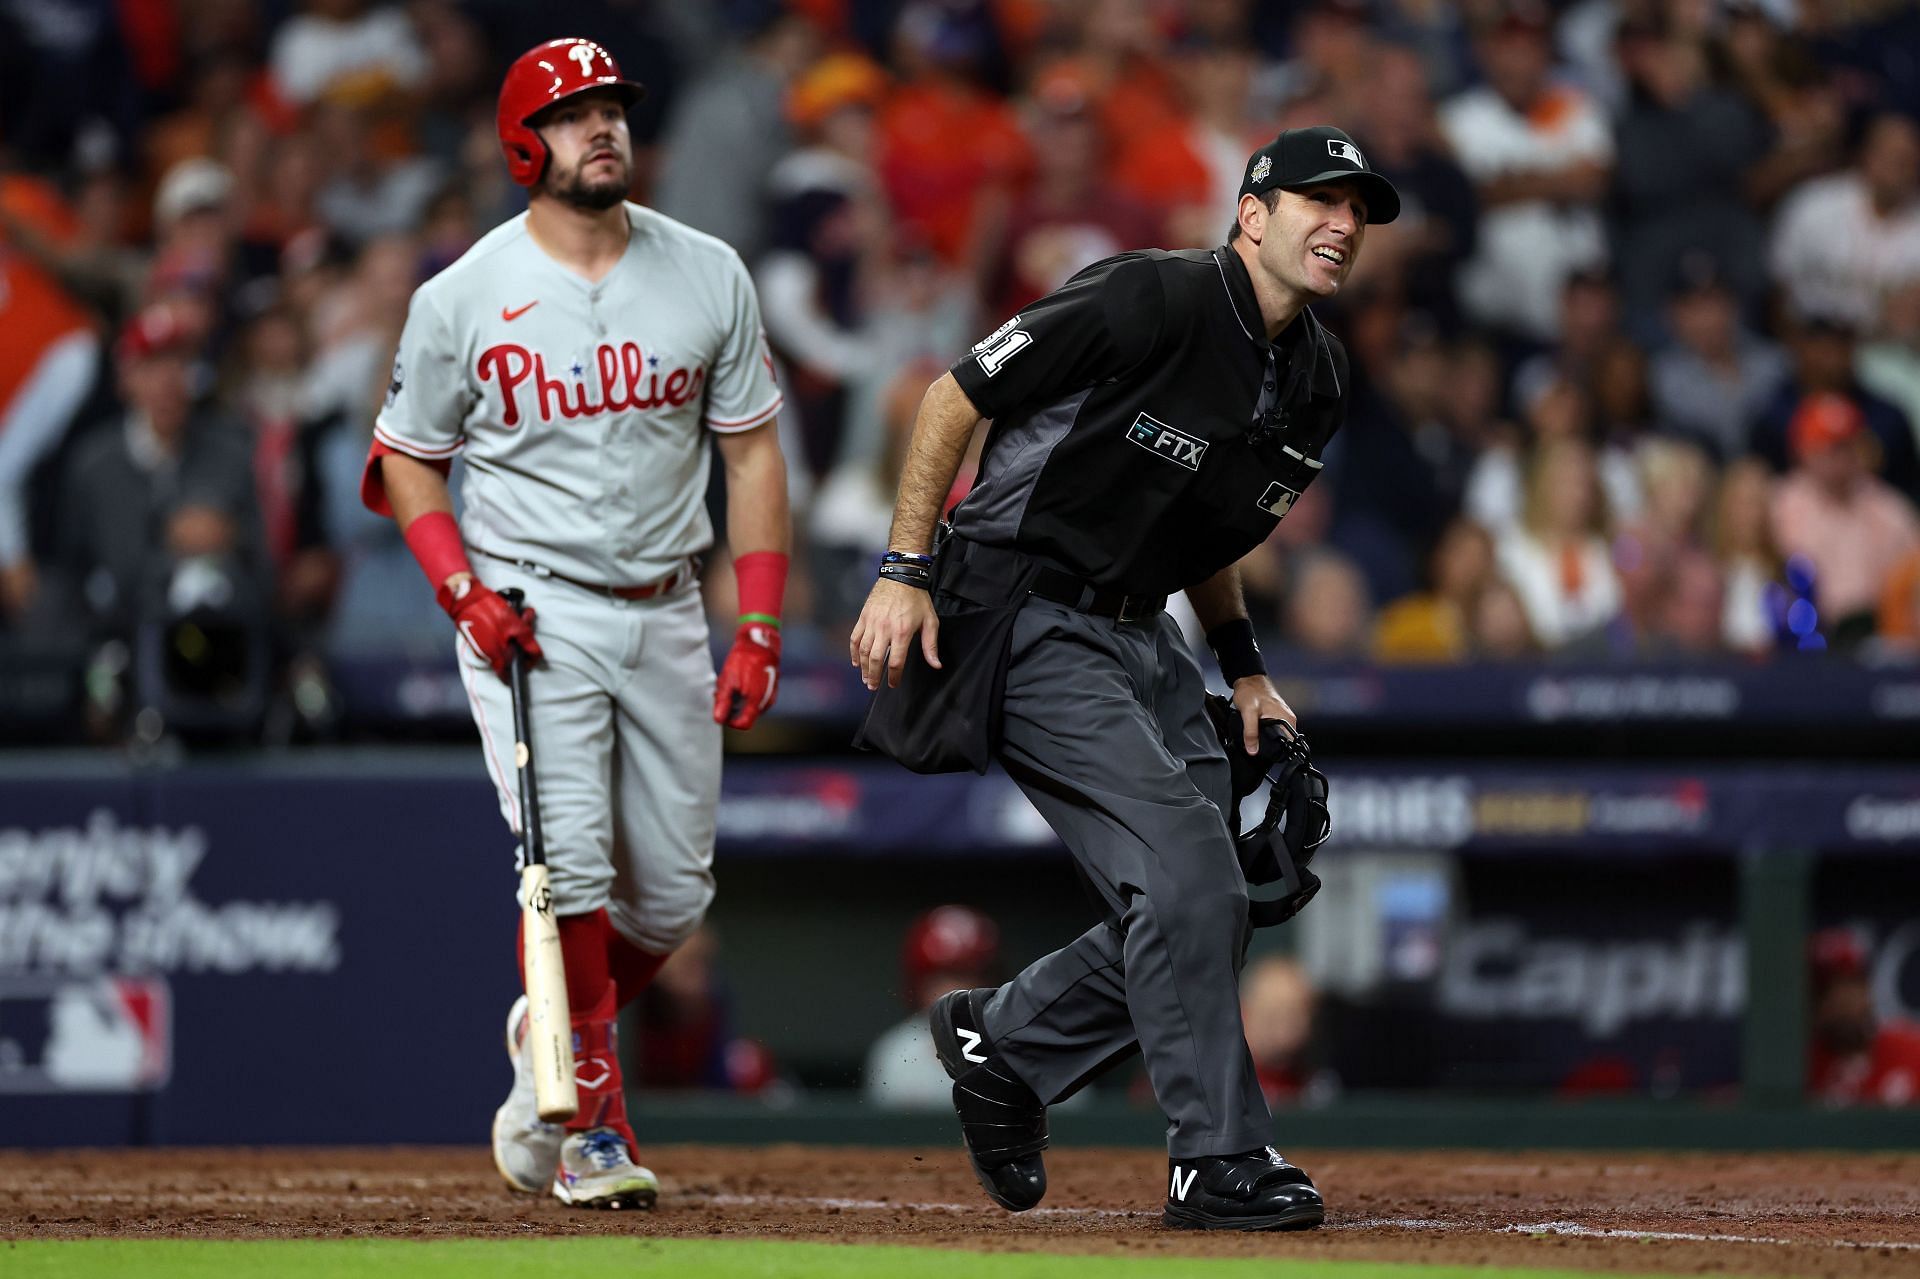 Baseball fans want umpire 'suspended immediately' after shock call sees JT  Realmuto ejected from MLB game